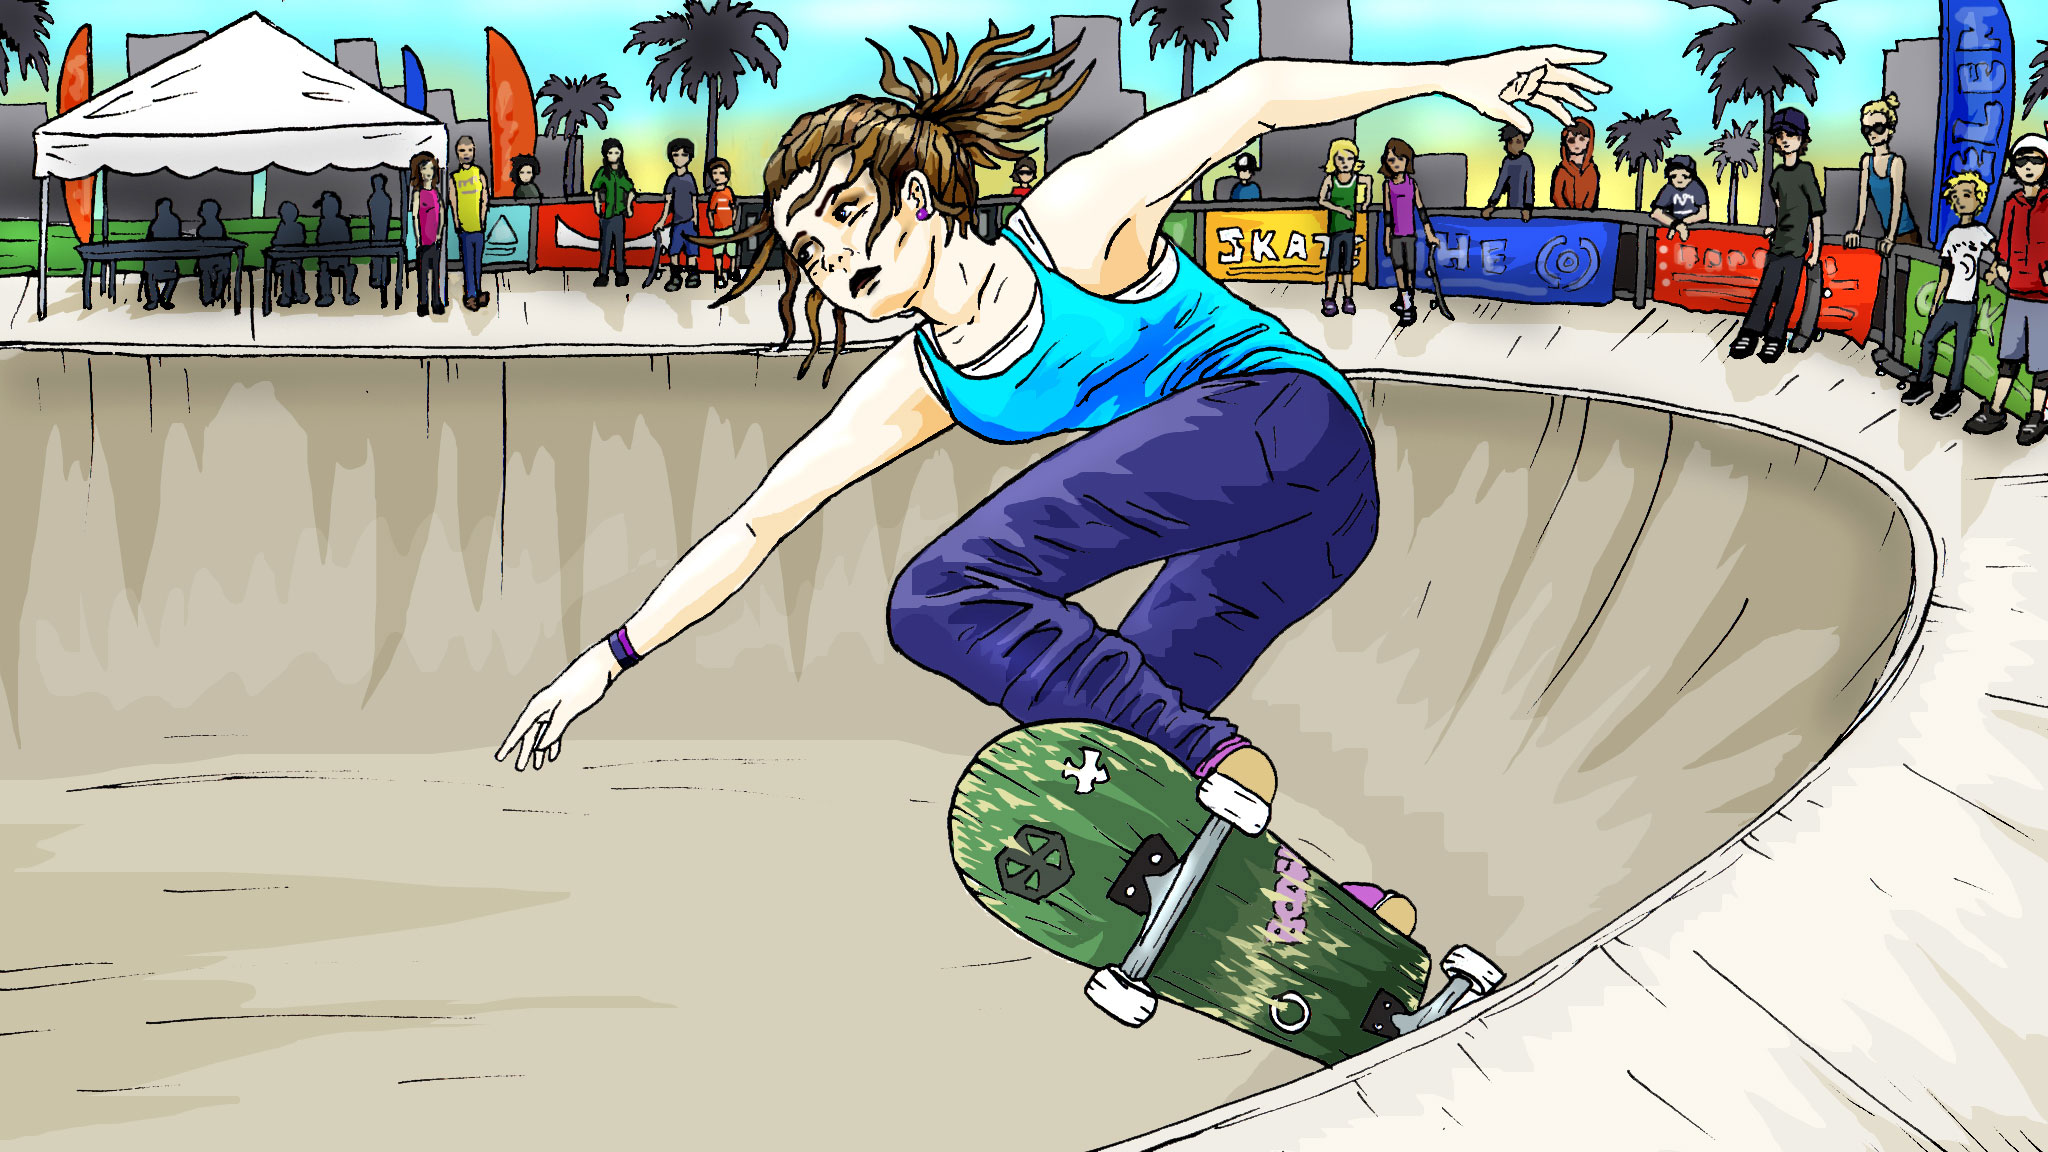 The media landscape for women in skateboarding has changed dramatically in the past decade. Now, the athletes themselves have a say in what makes it out into the world of skate media due to the social media revolution.